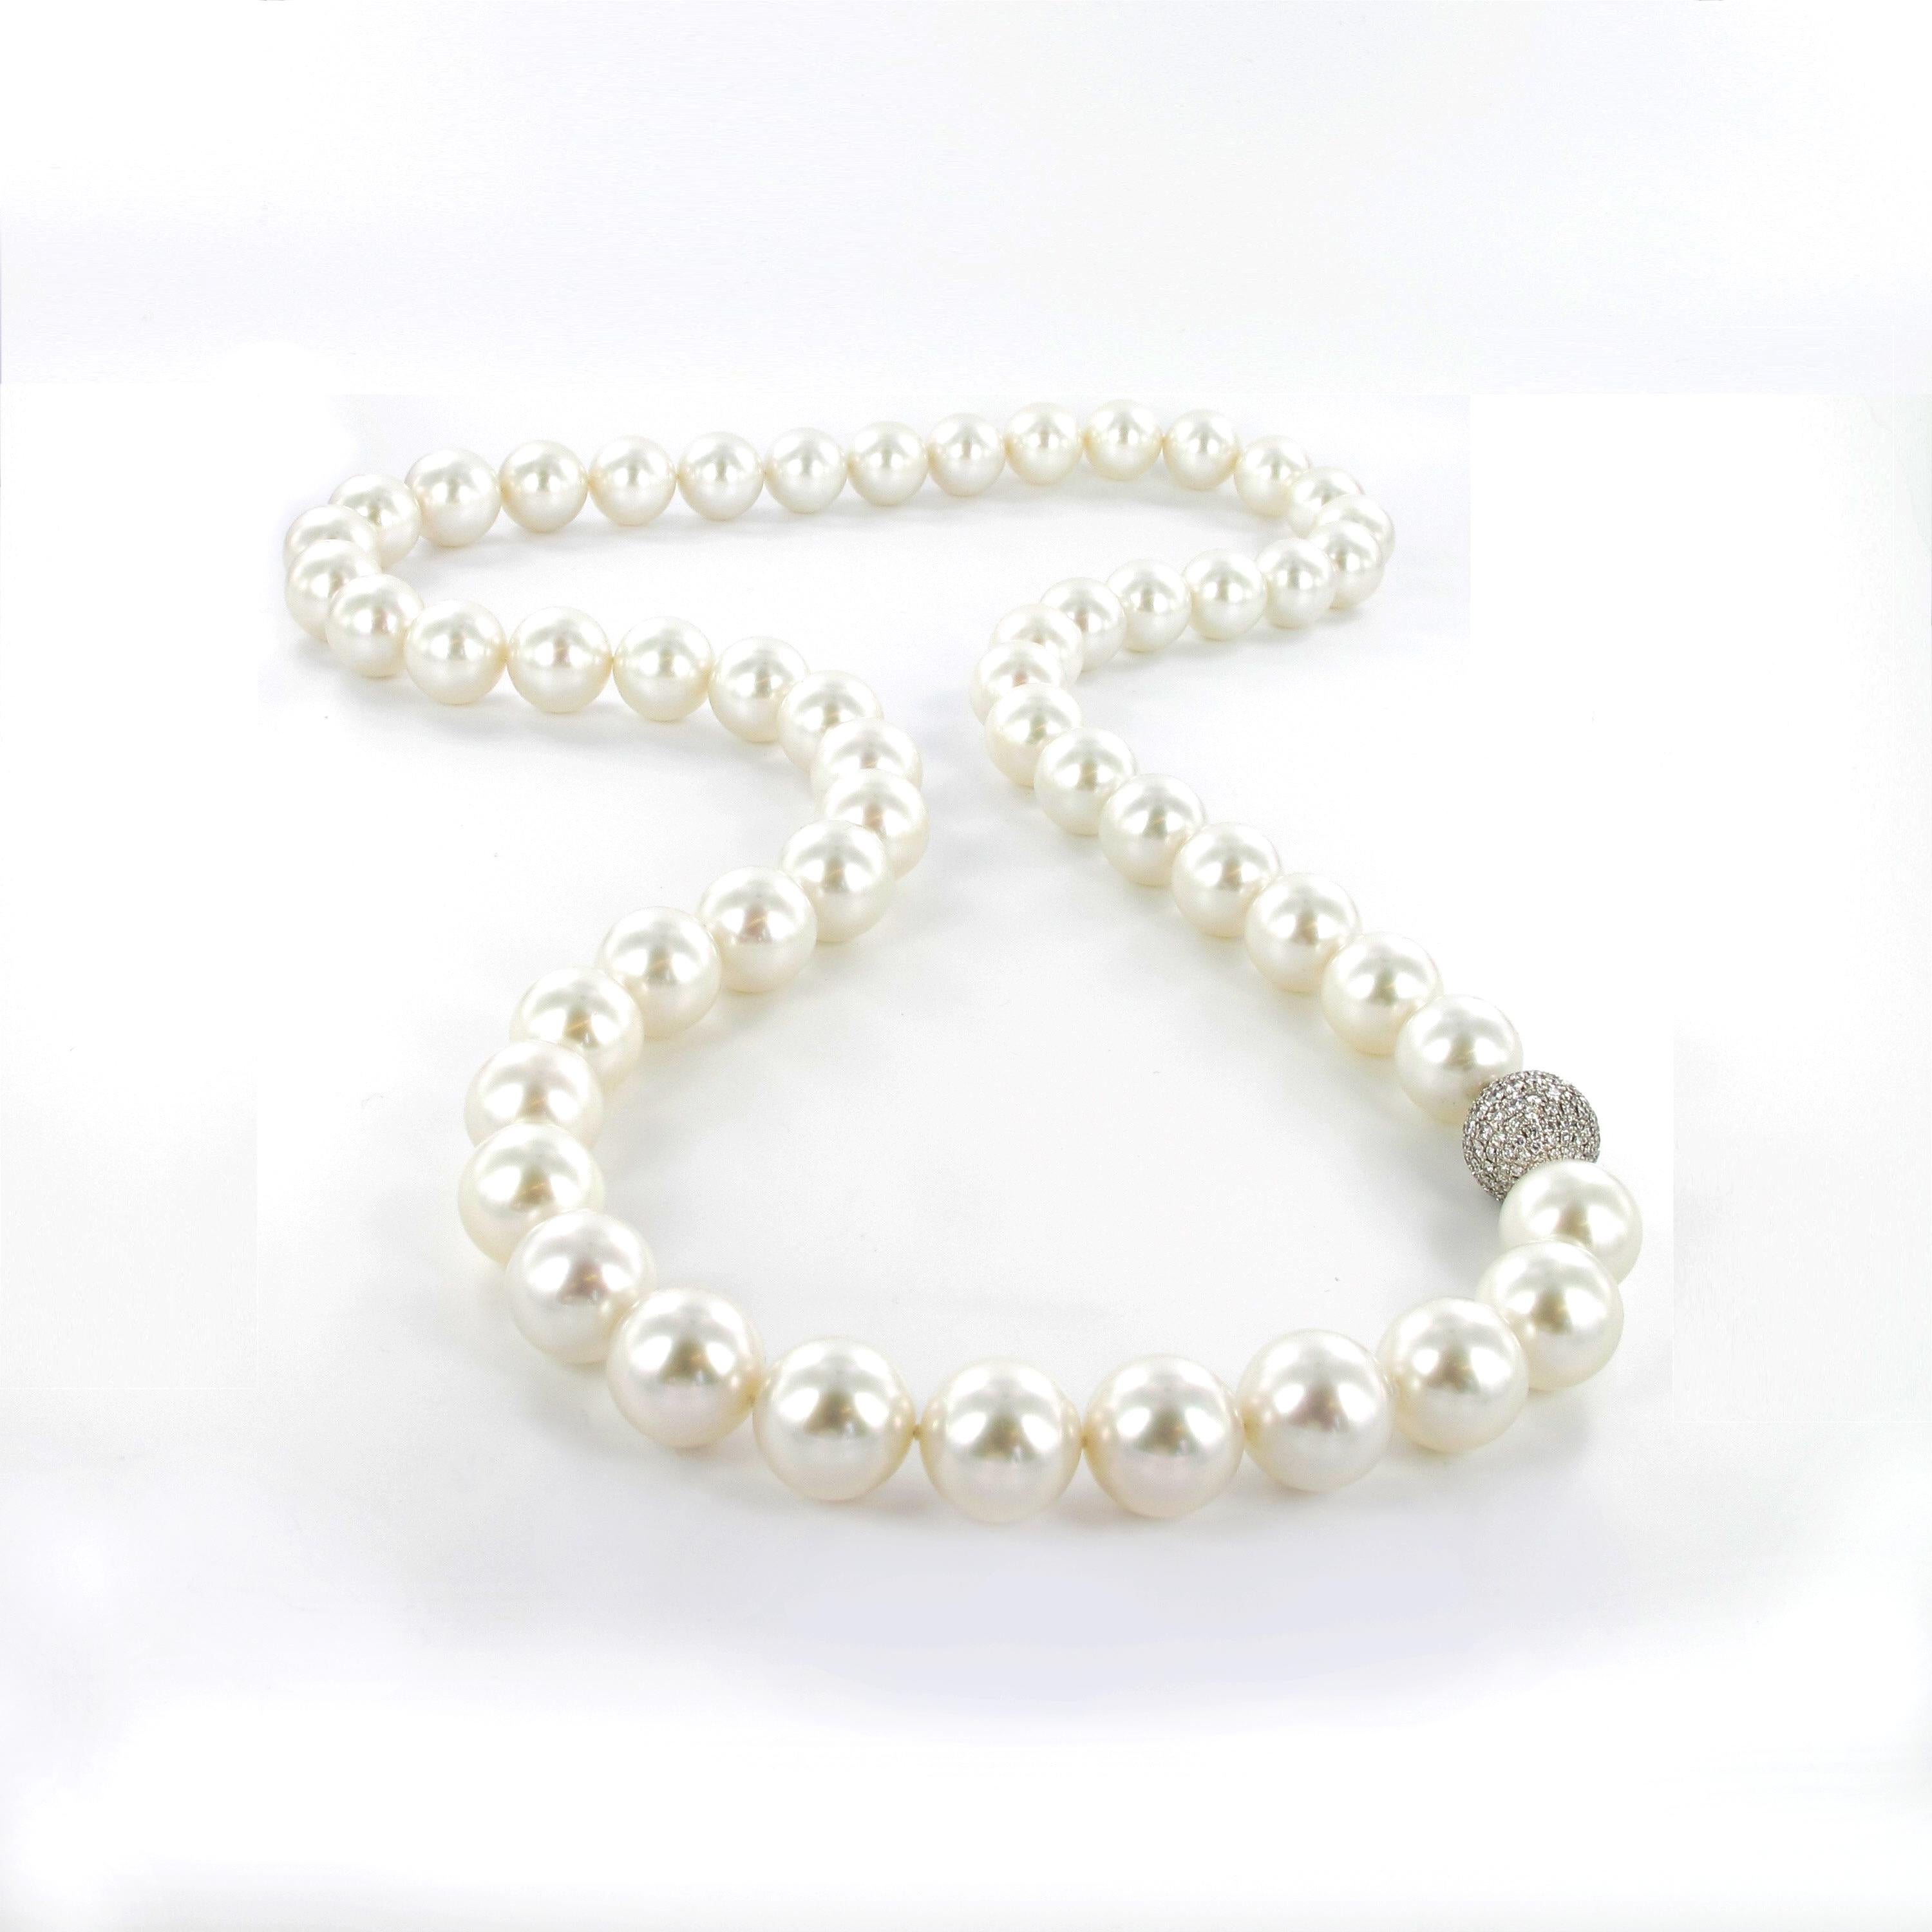 Very fine South Sea cultured pearl necklace composed of fifty-three perfectly round pearls graduated from 14.95 to 17.60mm. The beads are of white bodycolour with no gray or cream shades but added with light, attractive pink overtones. 80% of the